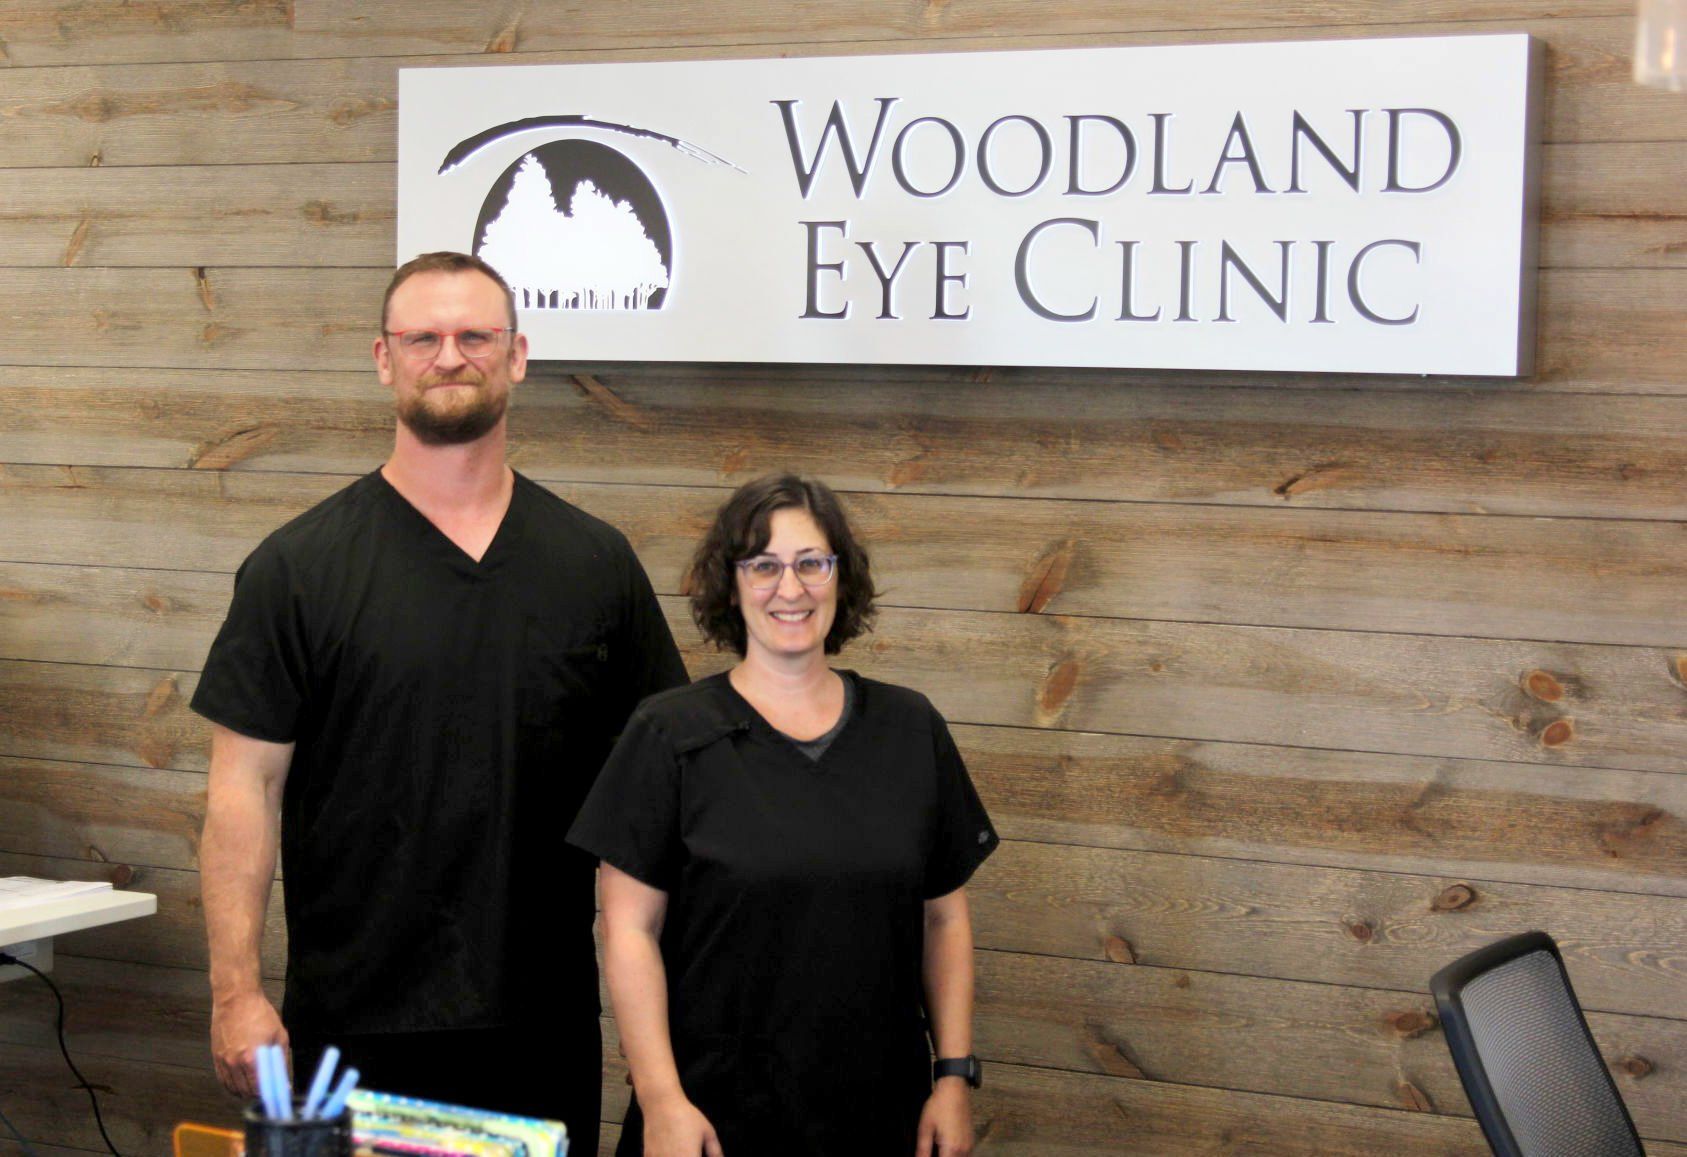 Dr. Josh Woodland (left) and Dr. Corey Kelly celebrate the opening of their new facilty, Woodland Eye Clinic in Dyersville, Iowa.    PHOTO CREDIT: Dylan Kurt